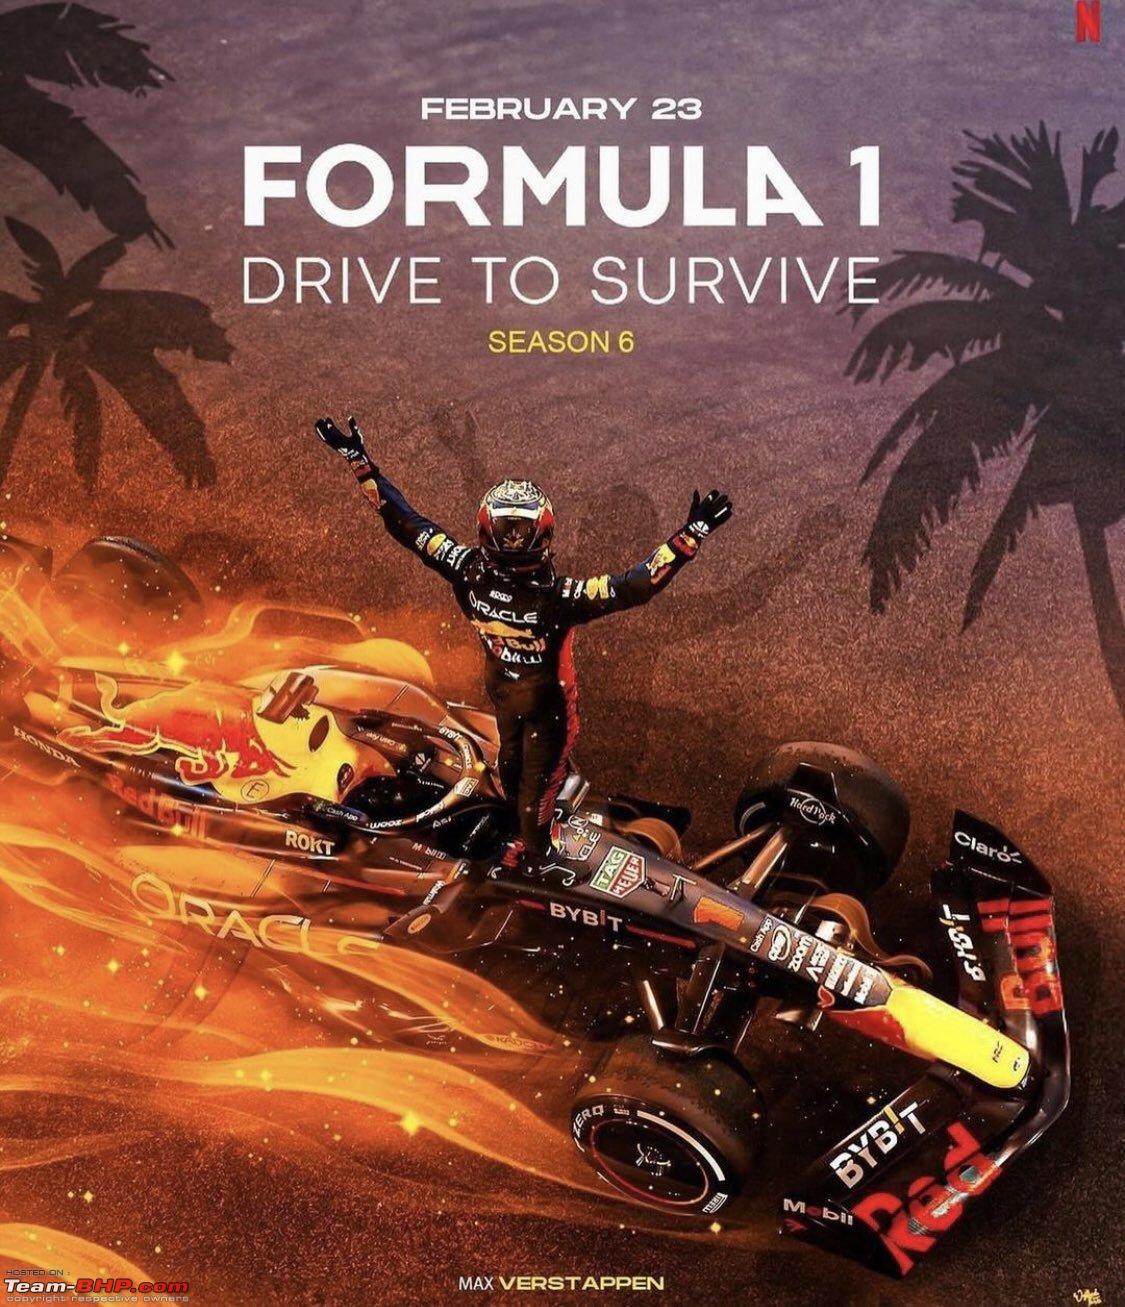 Drive to survive: Netflix's new F1 documentary series - Page 2